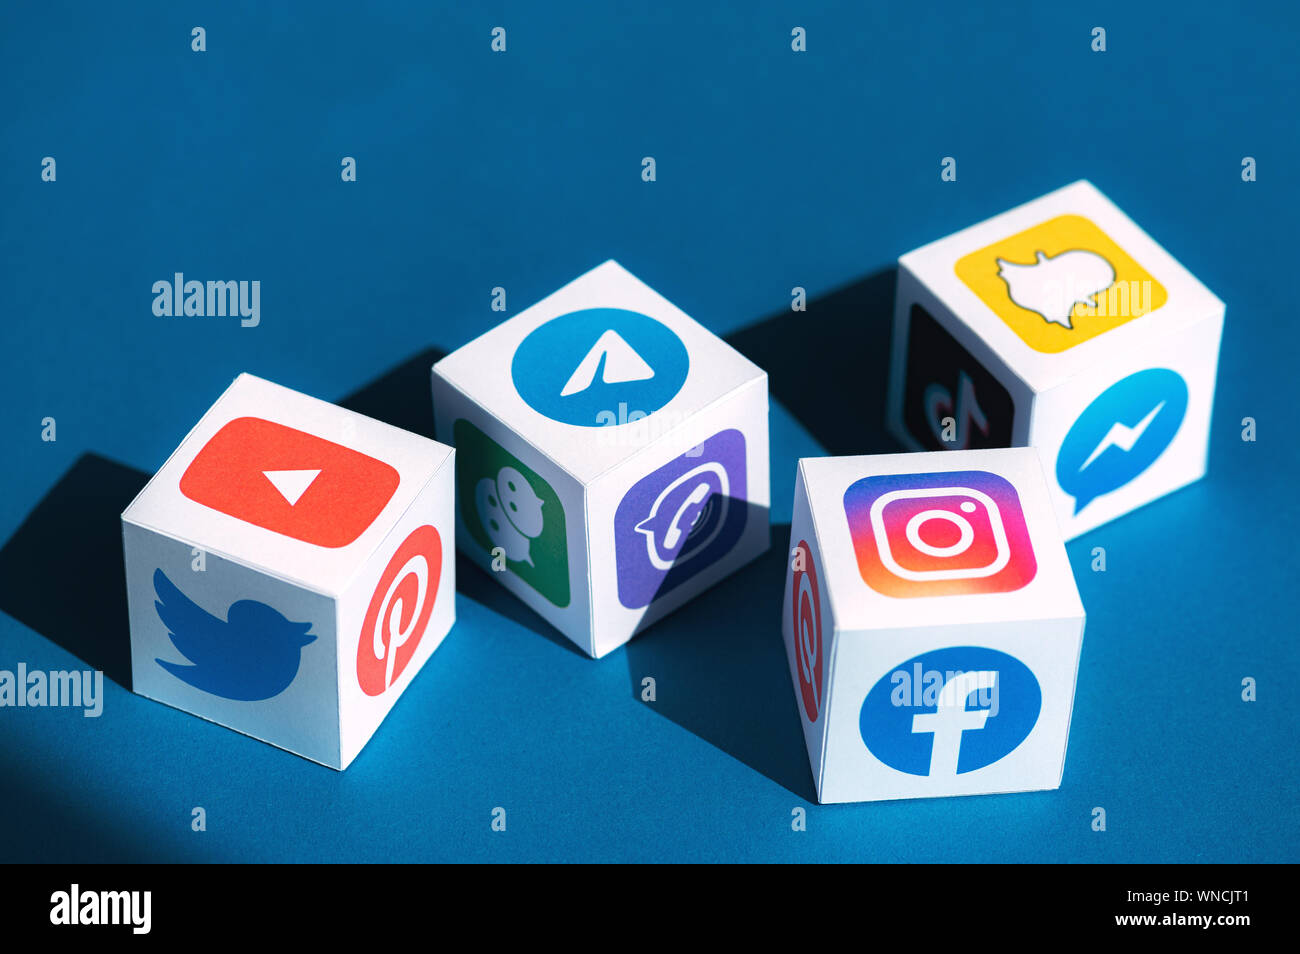 A paper cubes collection with printed logos of world-famous social networks and online messengers. Stock Photo